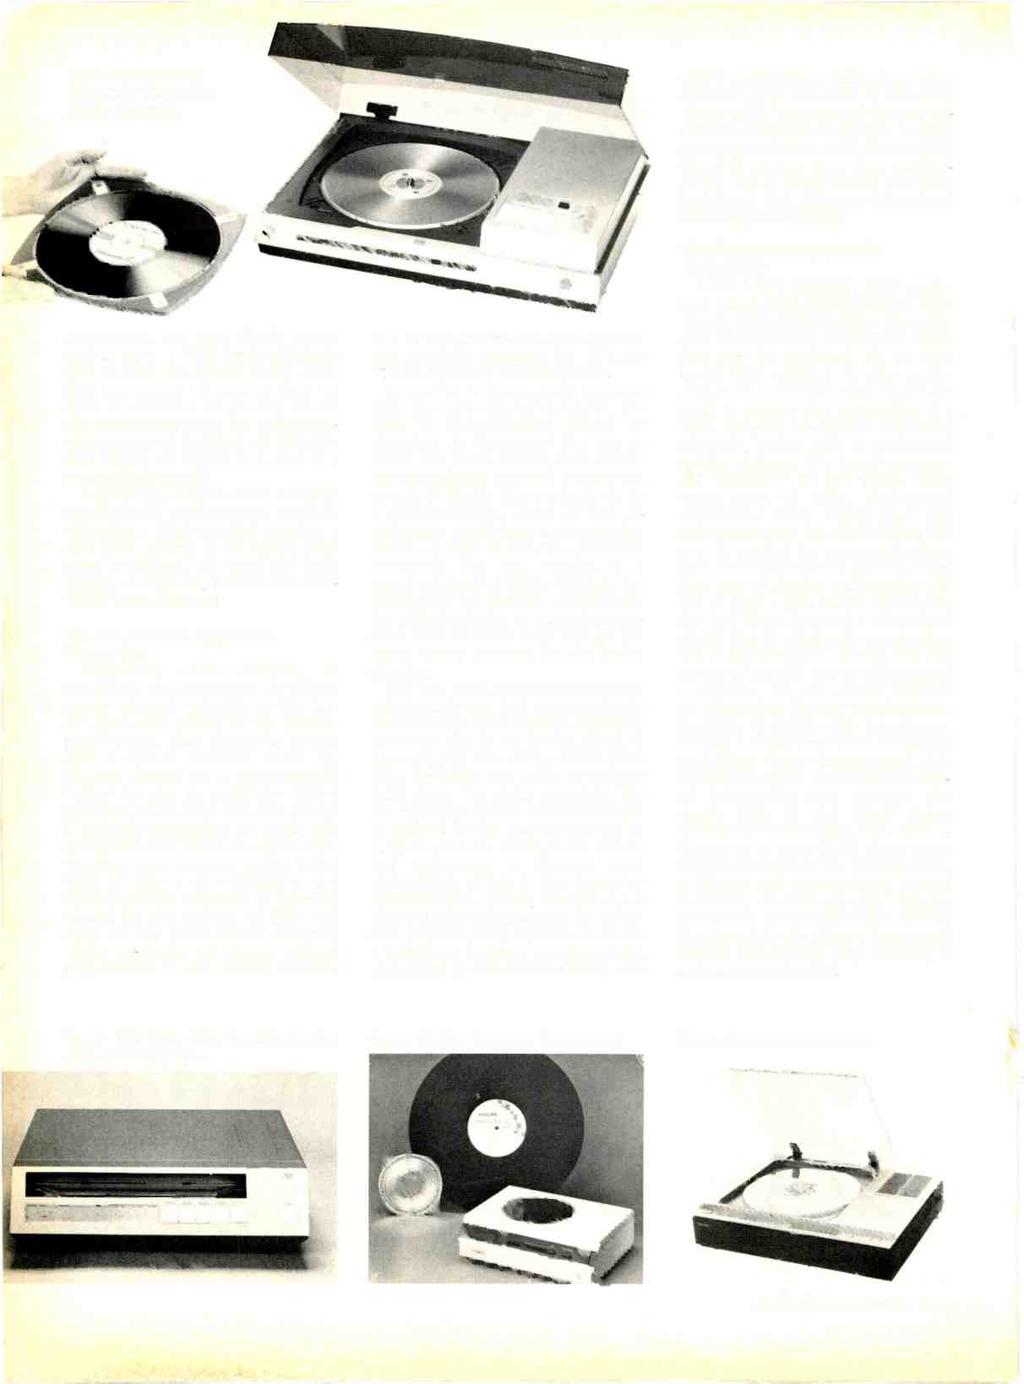 Fig. 1-Matsushita/ Panasonic Visc-o-Pac player and discs. atmosphere, and fairly simple to use and to store.